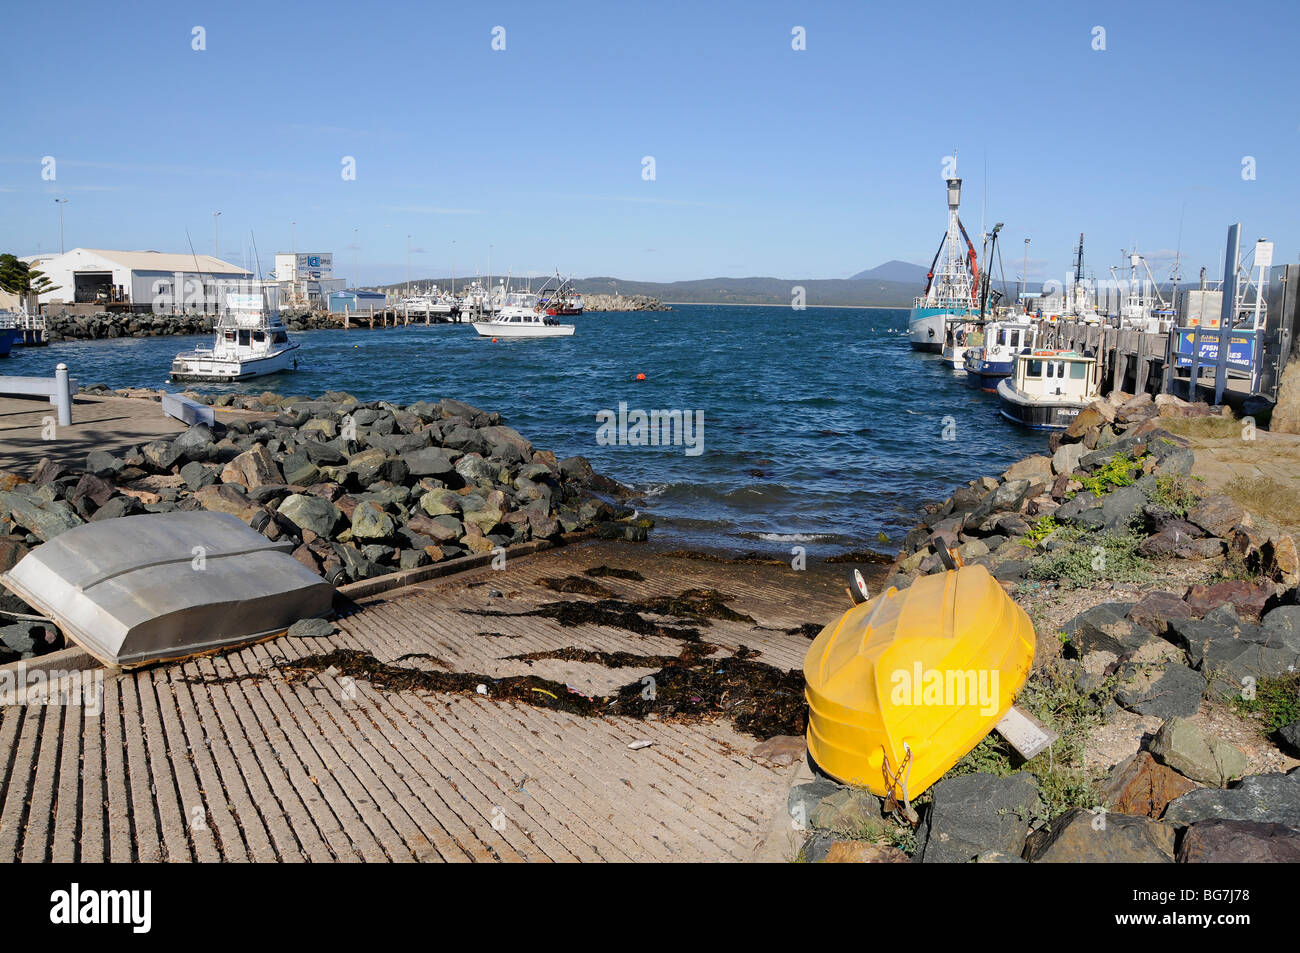 A fishing port at the small community town of Eden on the south coast of New South Wales in Australia. Stock Photo